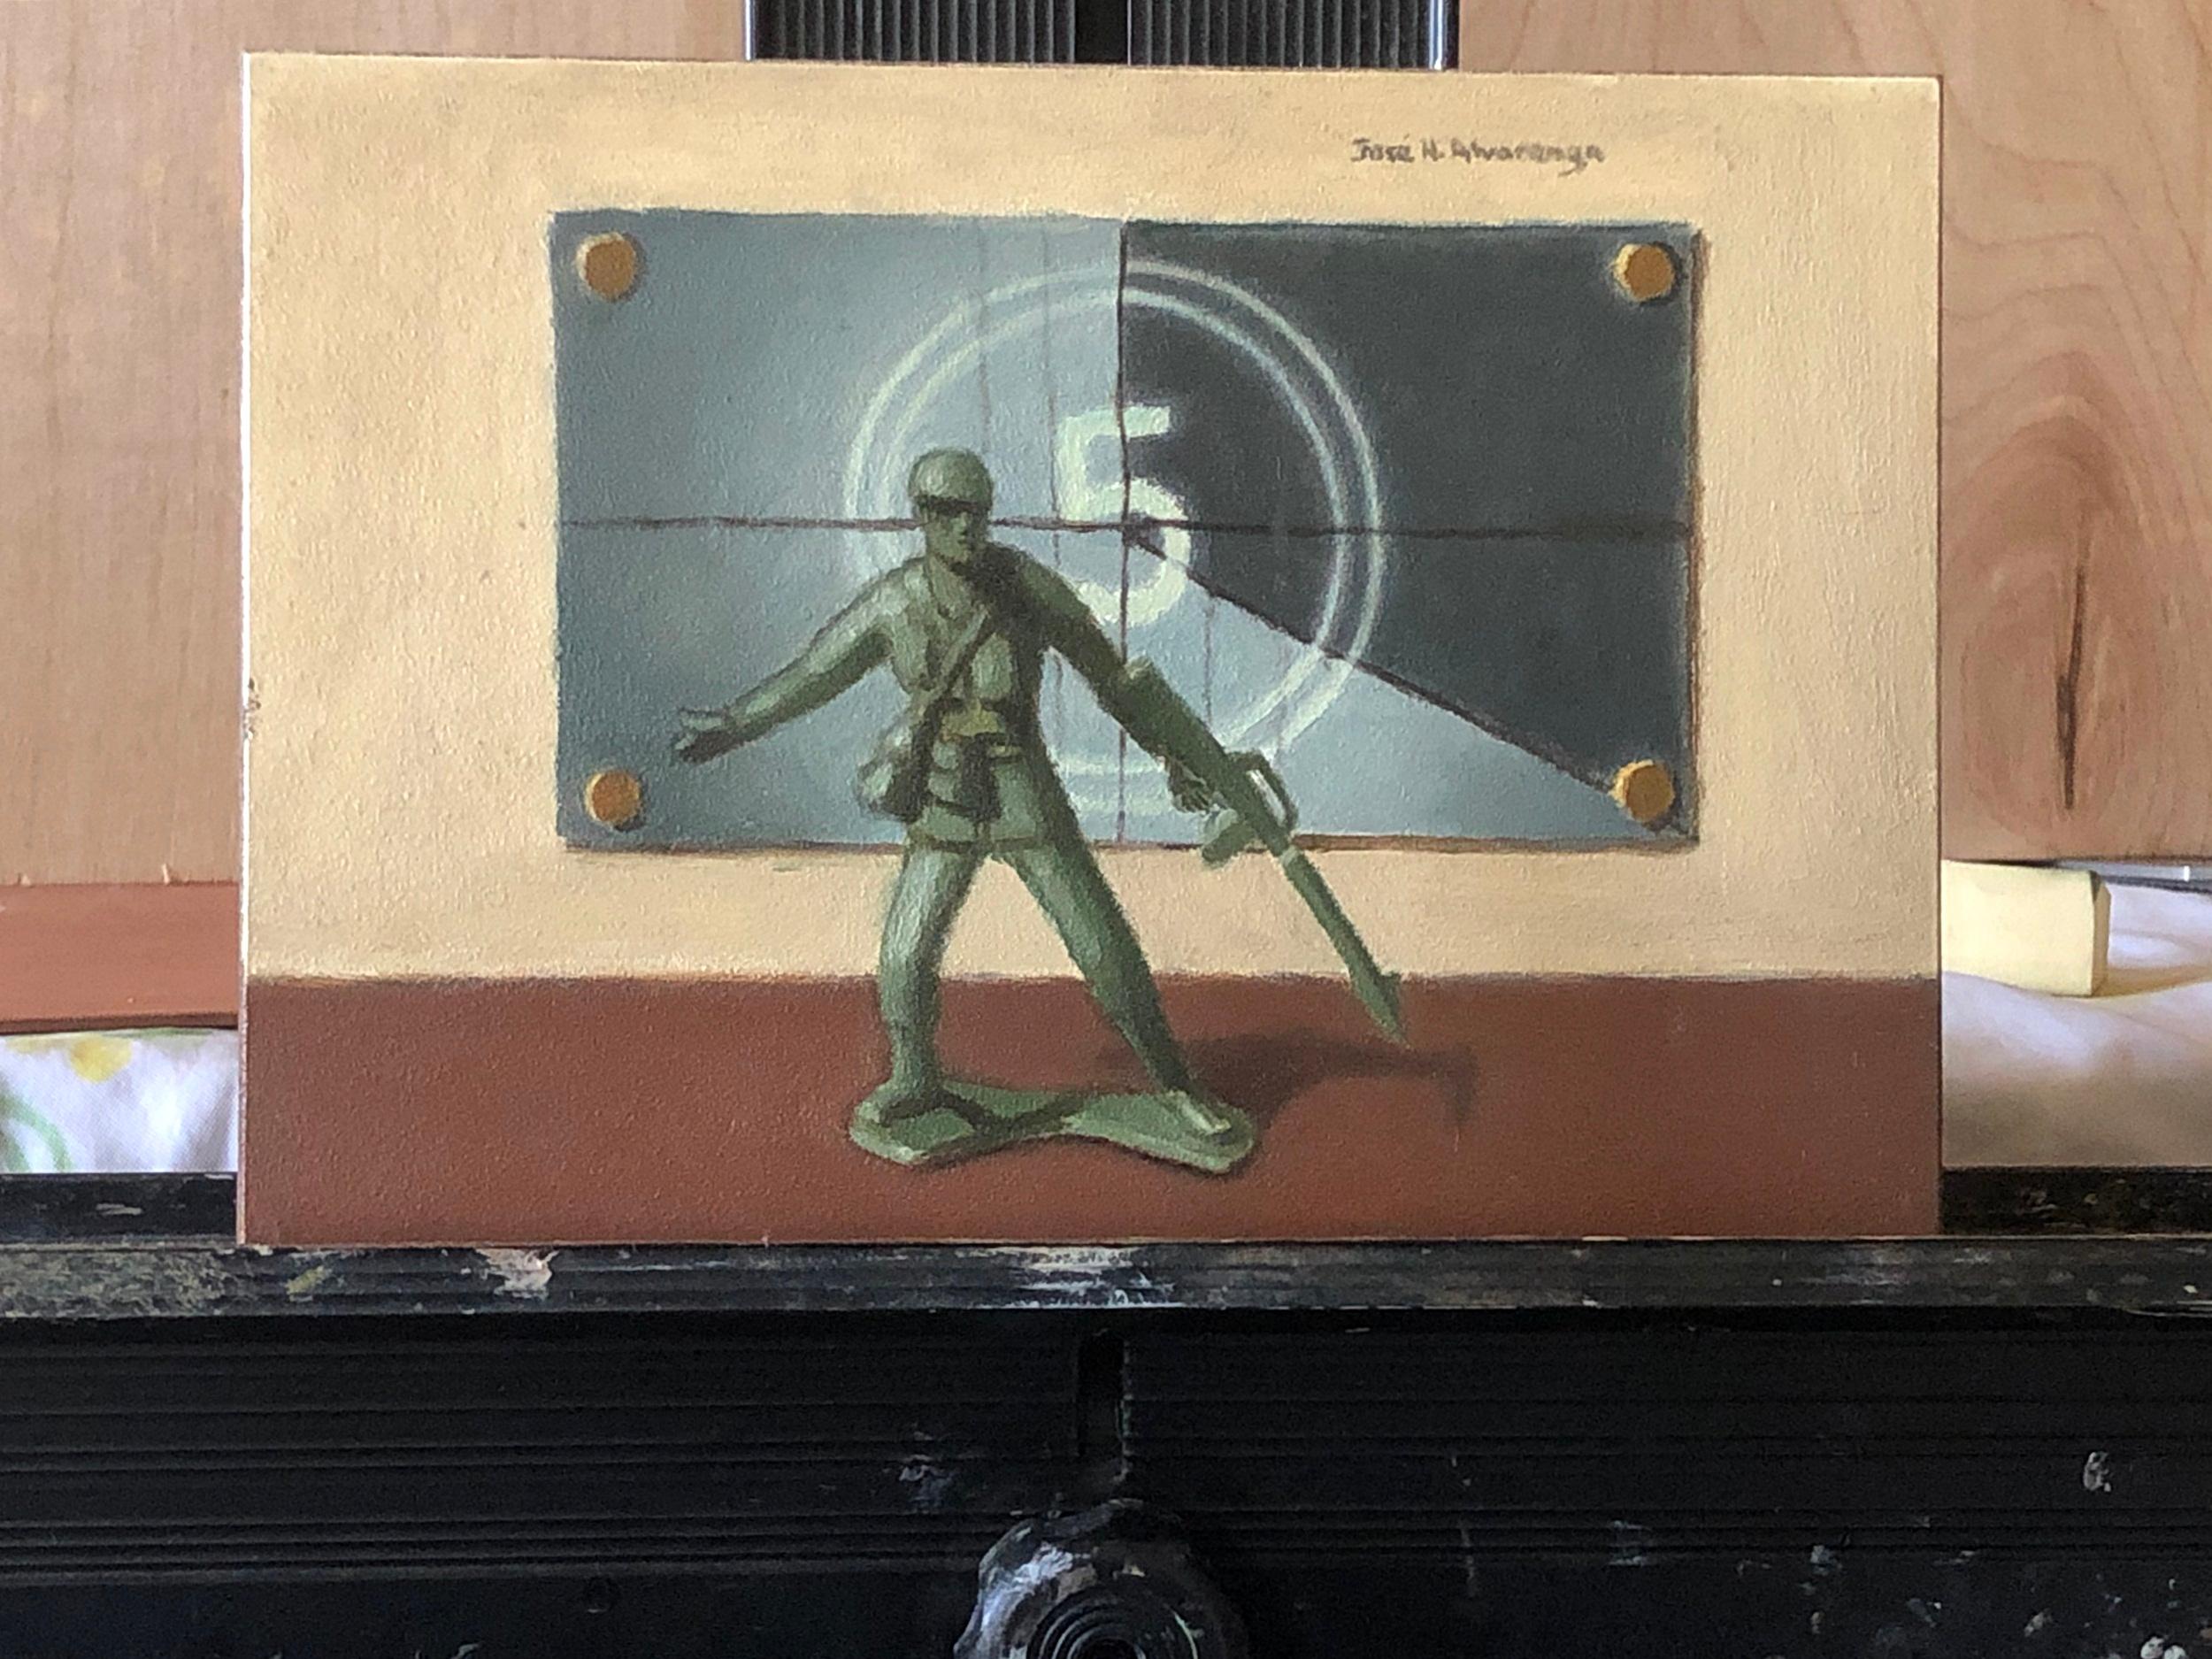 <p>Artist Comments<br />Artist Jose H. Alvarenga paints a tribute to action-adventure movies in classical impressionism.  He pictures the hero of the film, a plastic toy soldier, the last man standing. 